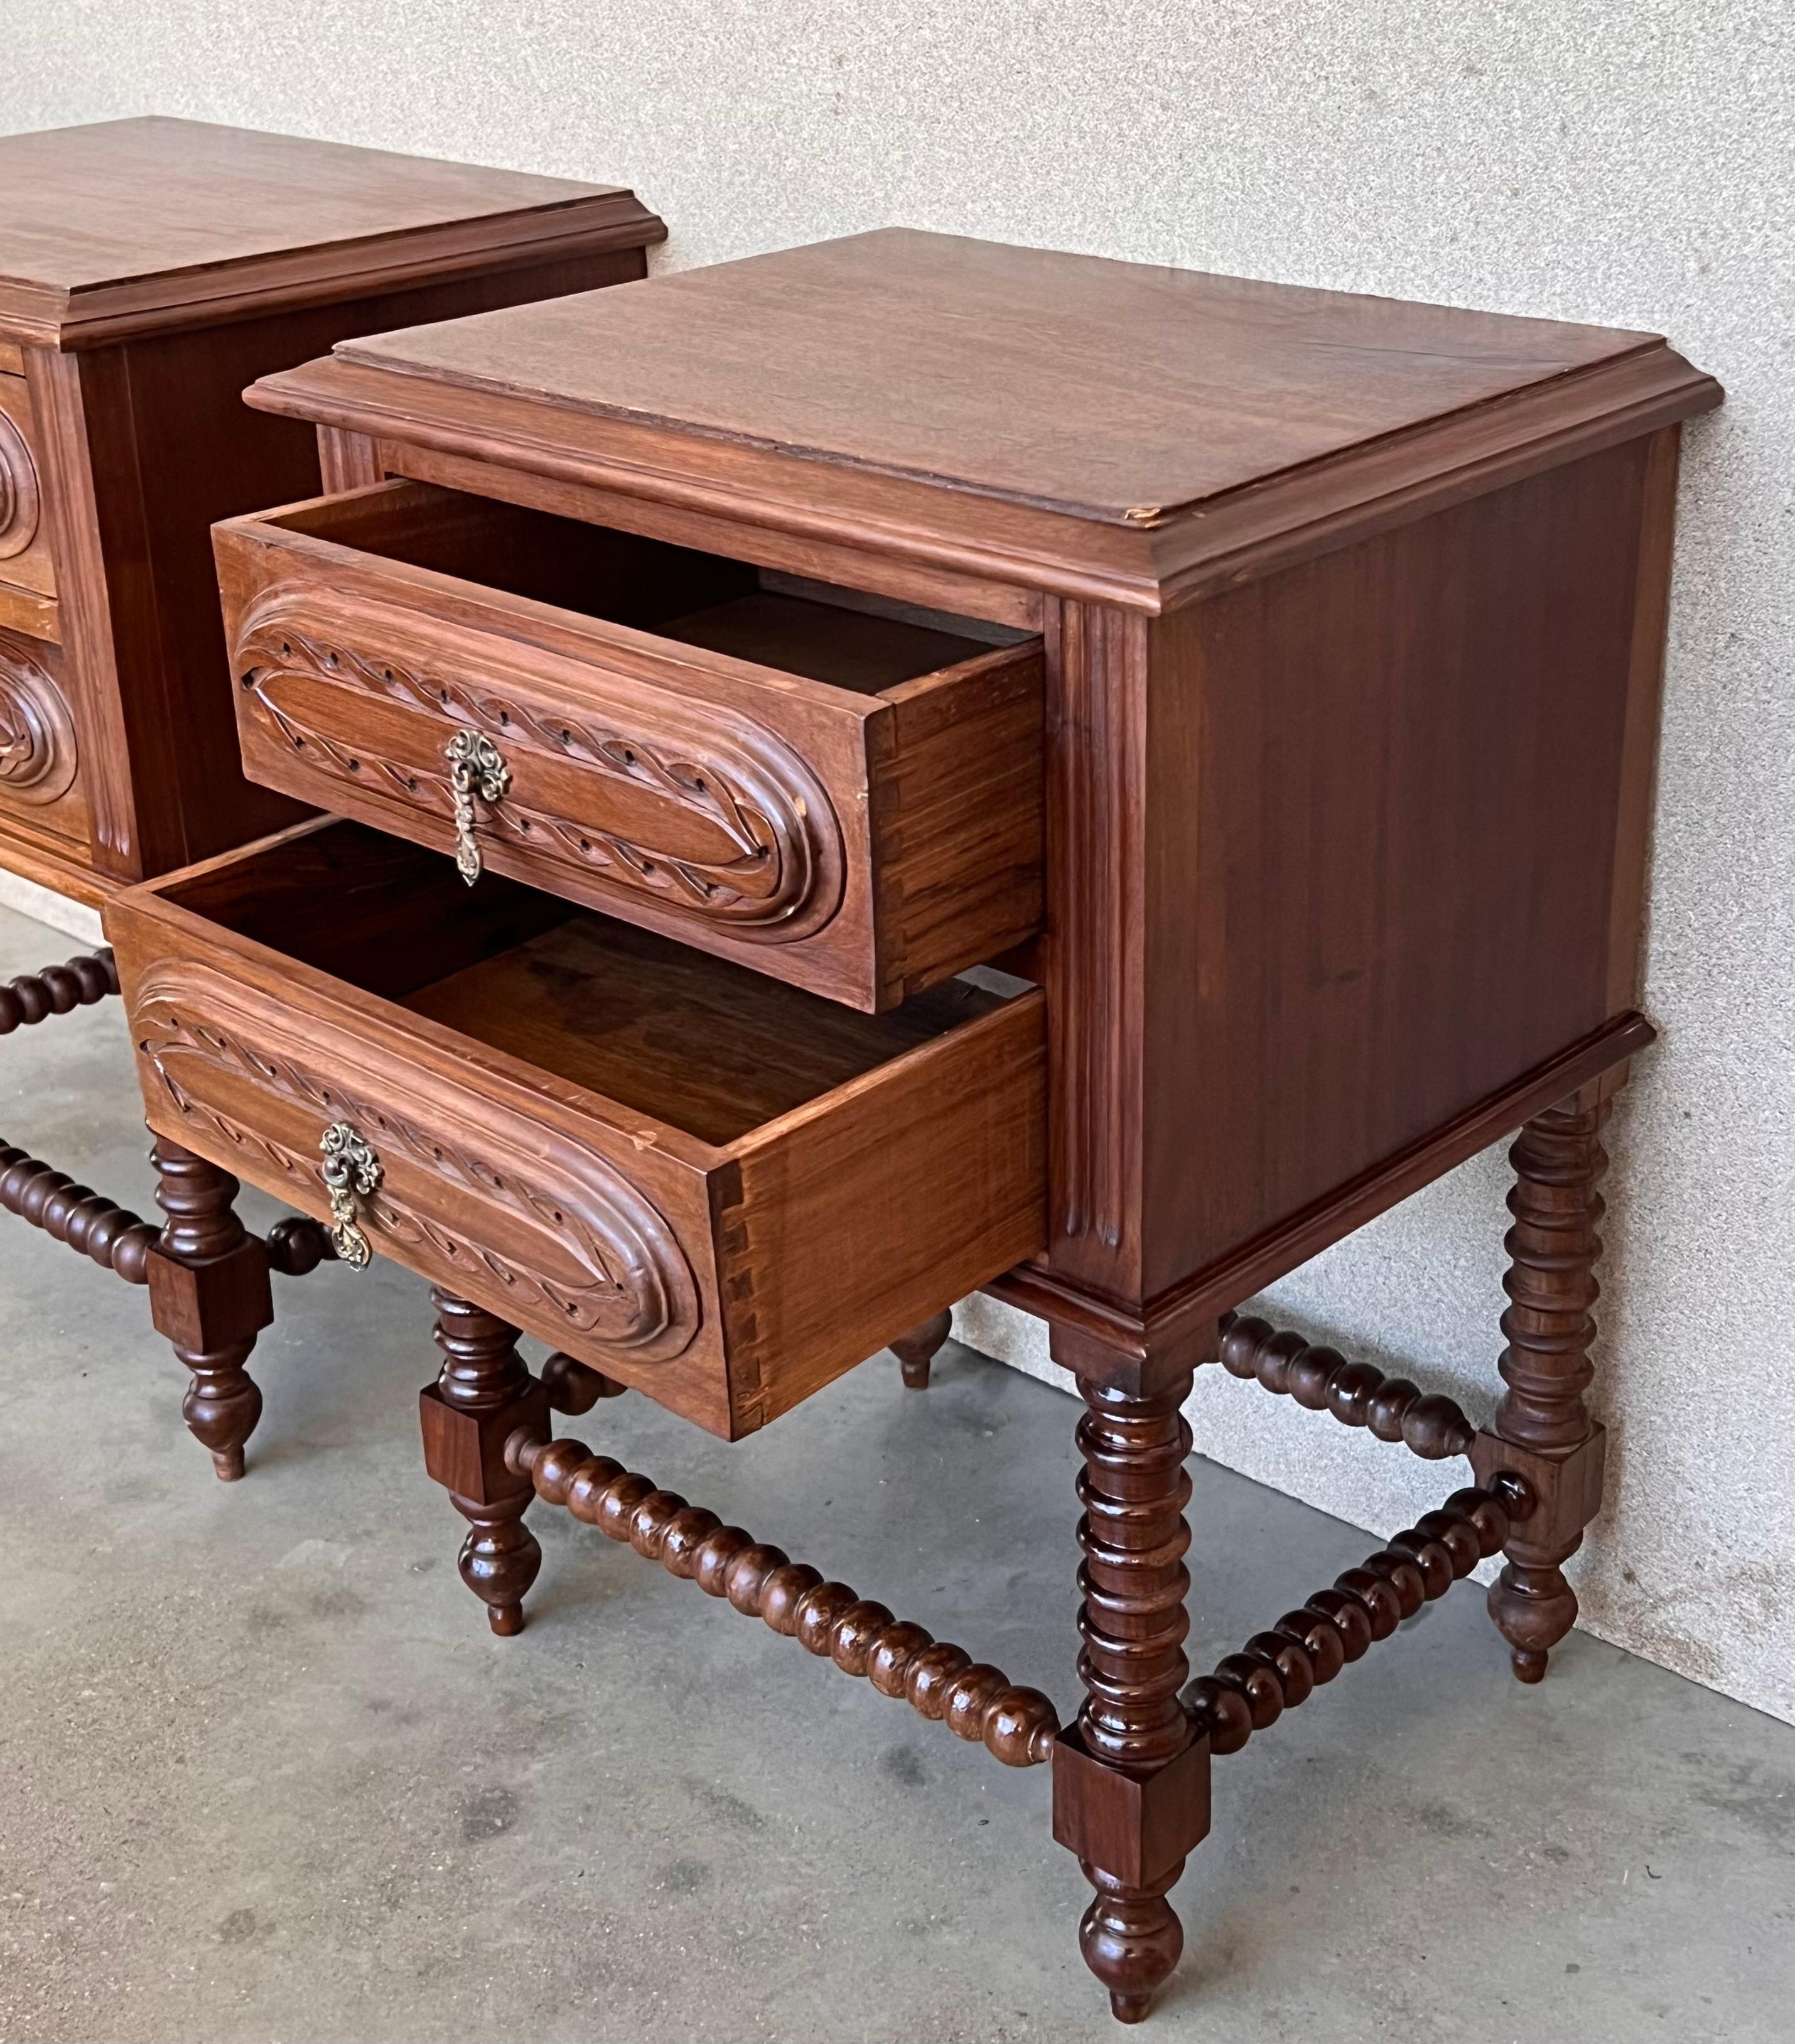 Pair of French Chestnut Bedside Nightstands with Two Drawers, Late 19th Century For Sale 4